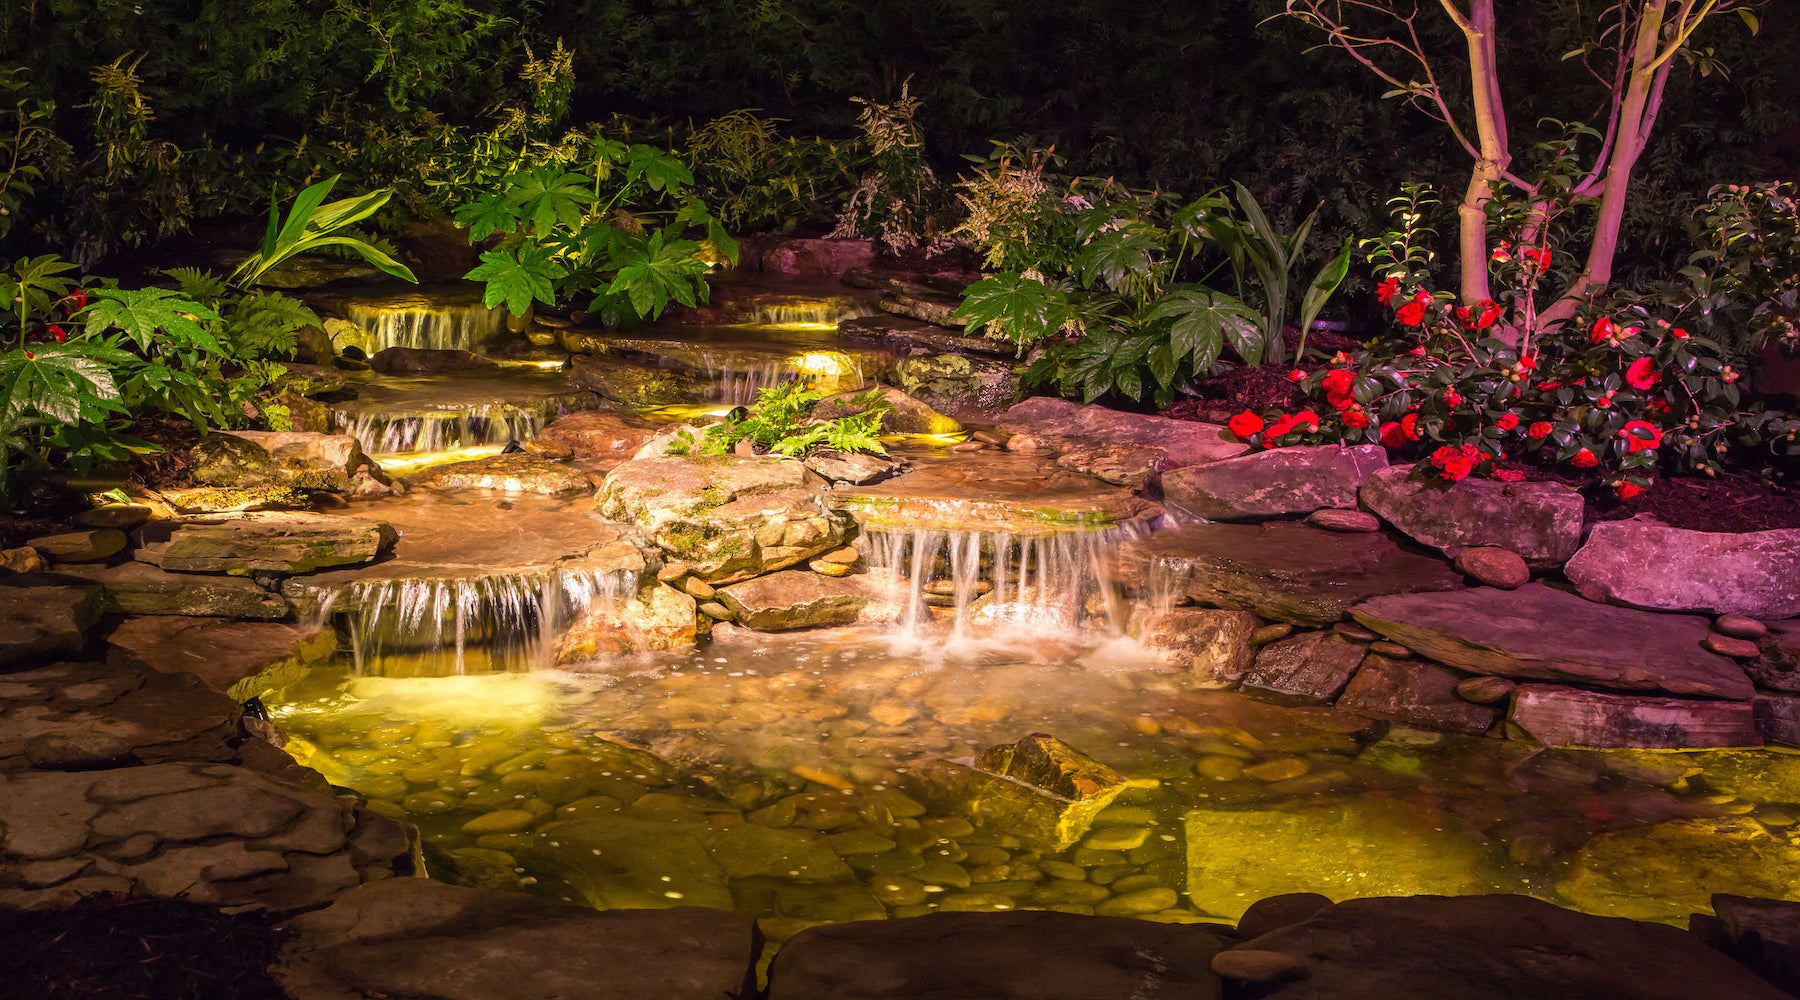 Pond lighting installed to illuminate the beautiful waterfall of a pond at night